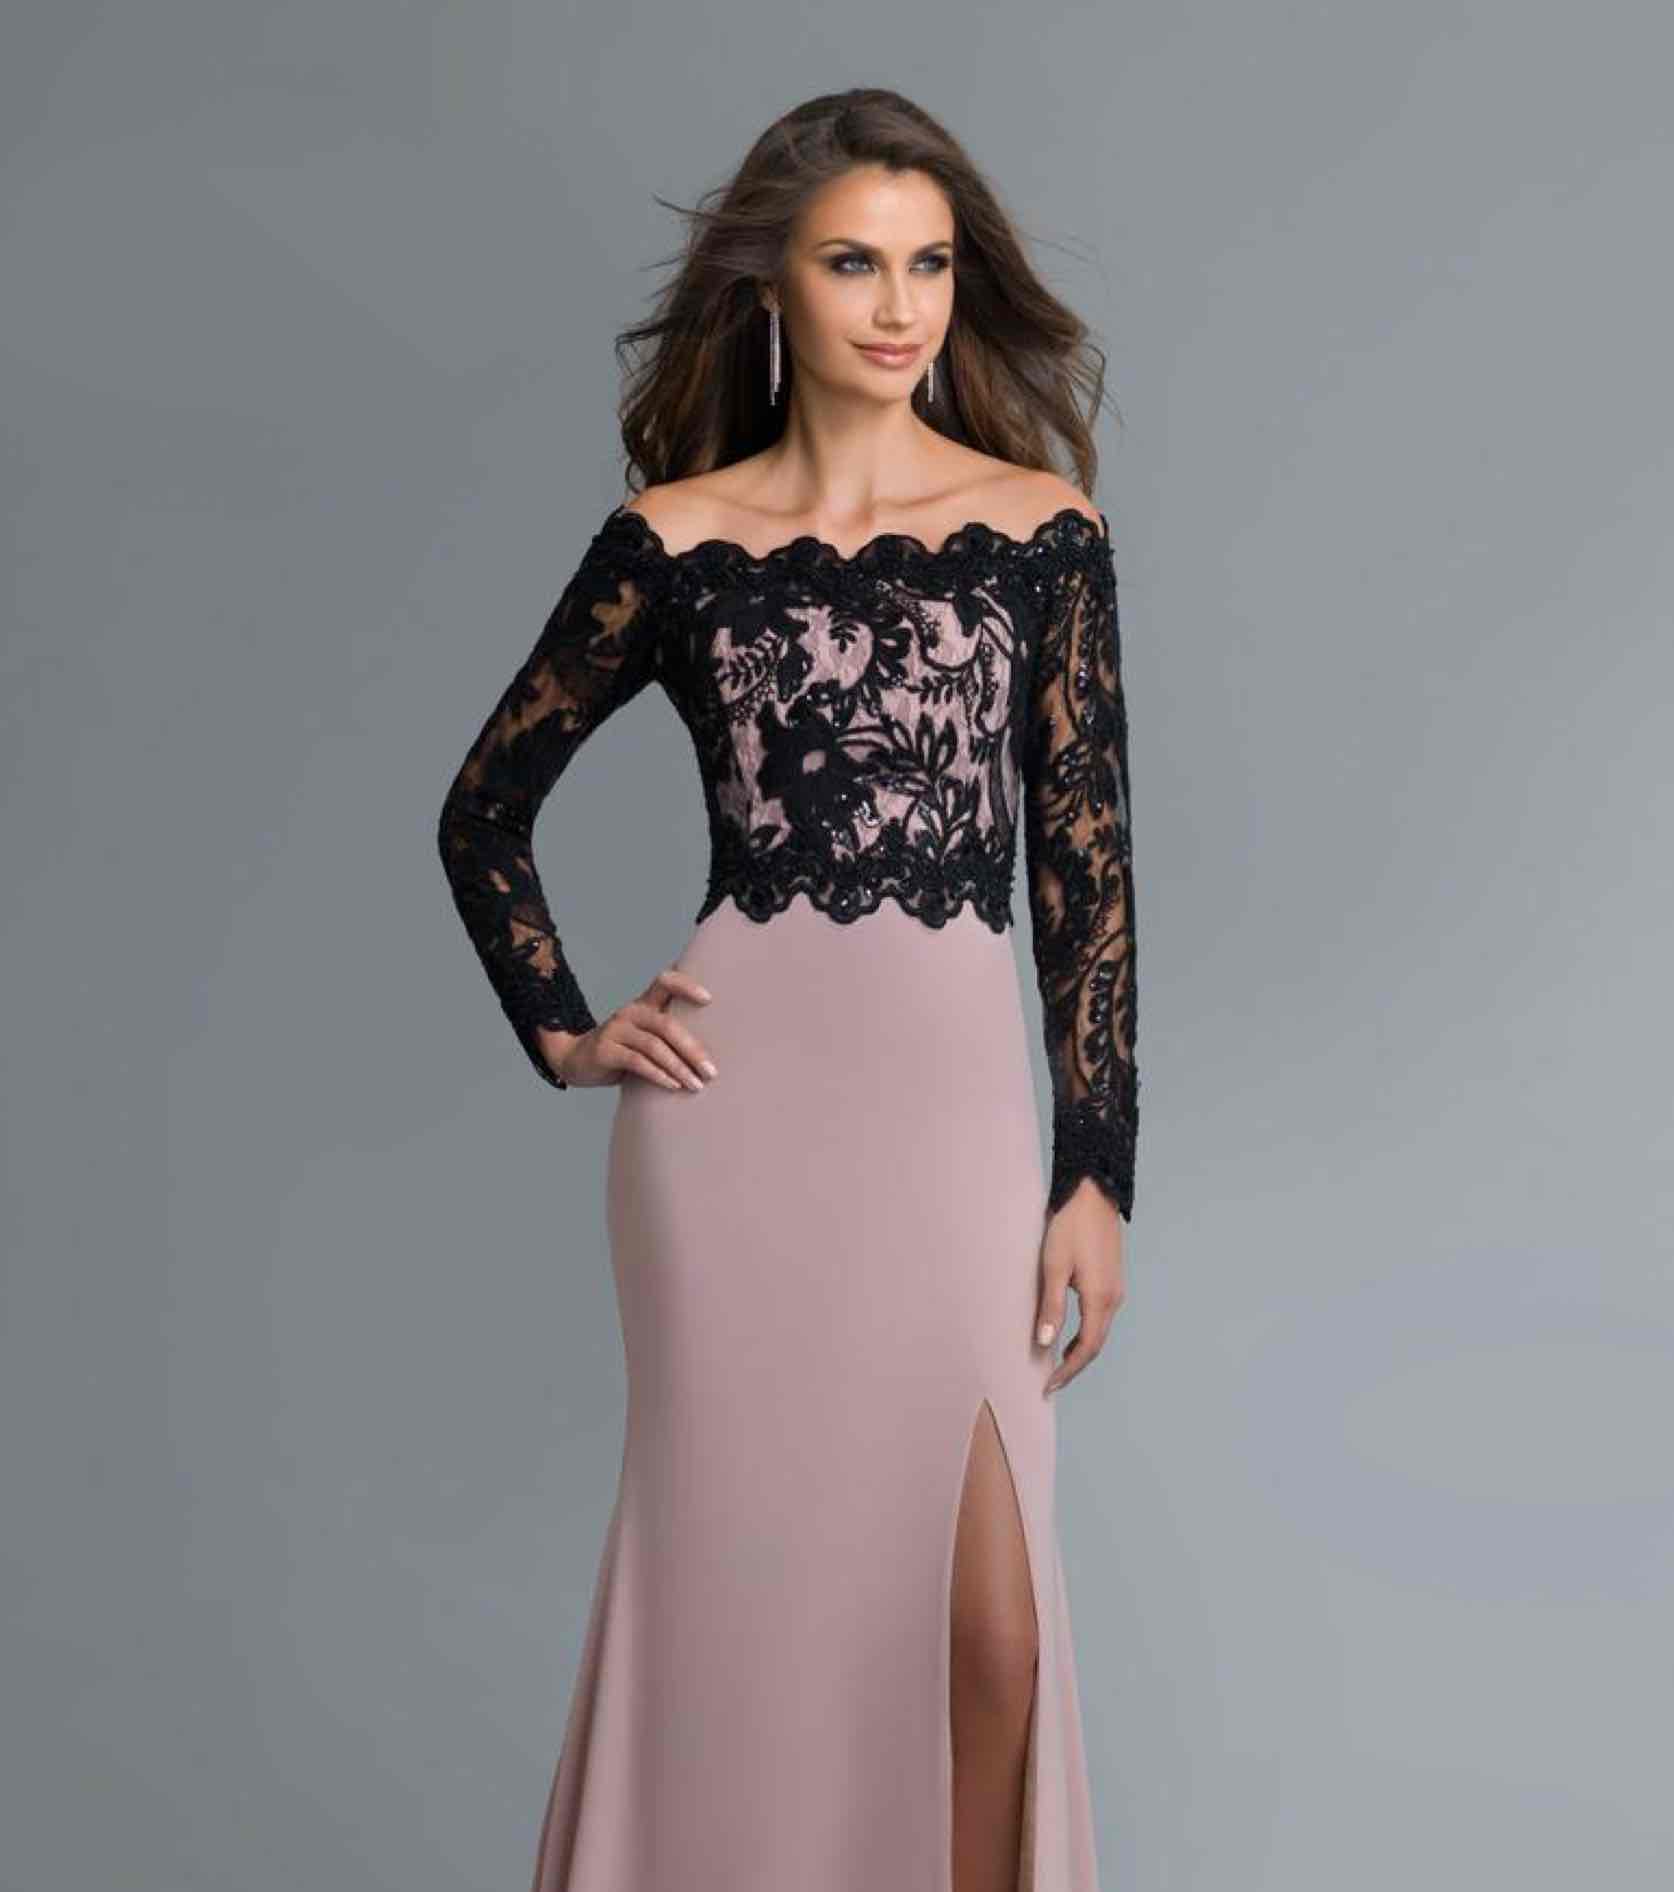 Model in pink Saboroma gown with black lace off the shoulder top